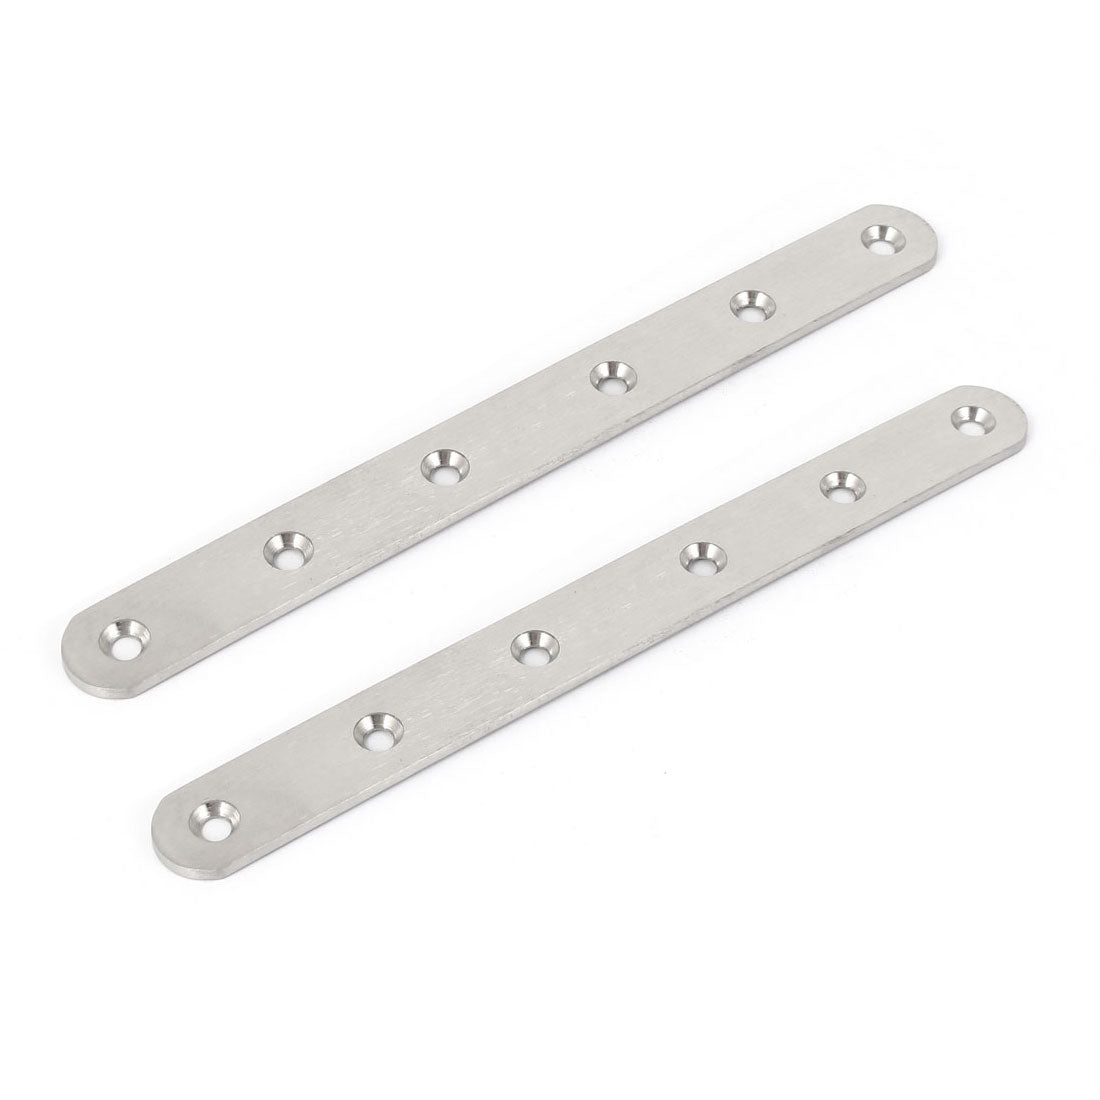 uxcell Uxcell 200mmx20mmx3mm Straight Flat Mending Repair Plate Joining Fastener 2pcs